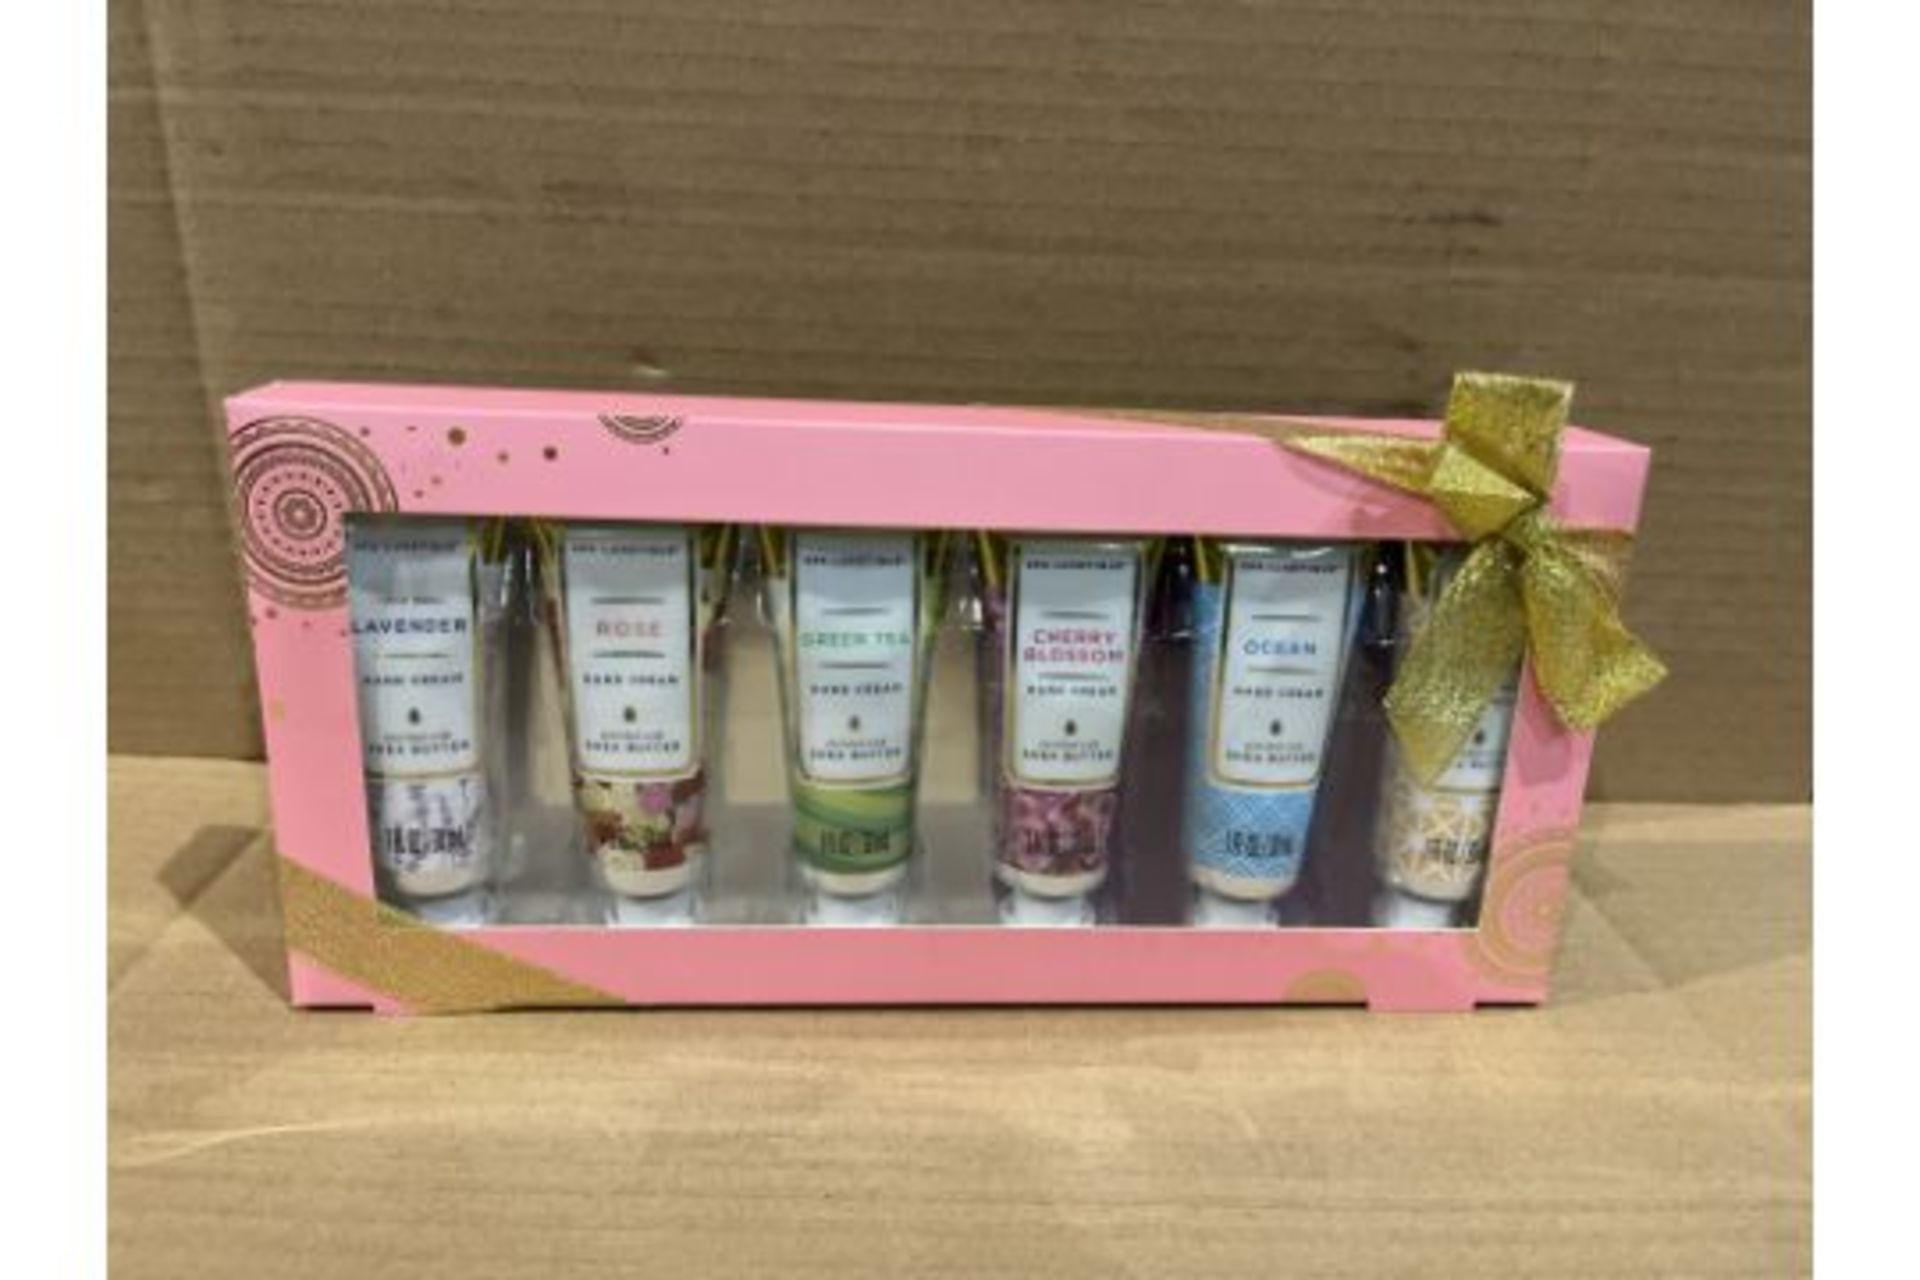 12 X BRAND NEW STES OF 6 SPA LUXETIQUE ASSORTED HAND CREAMS R12-10 - Image 2 of 2